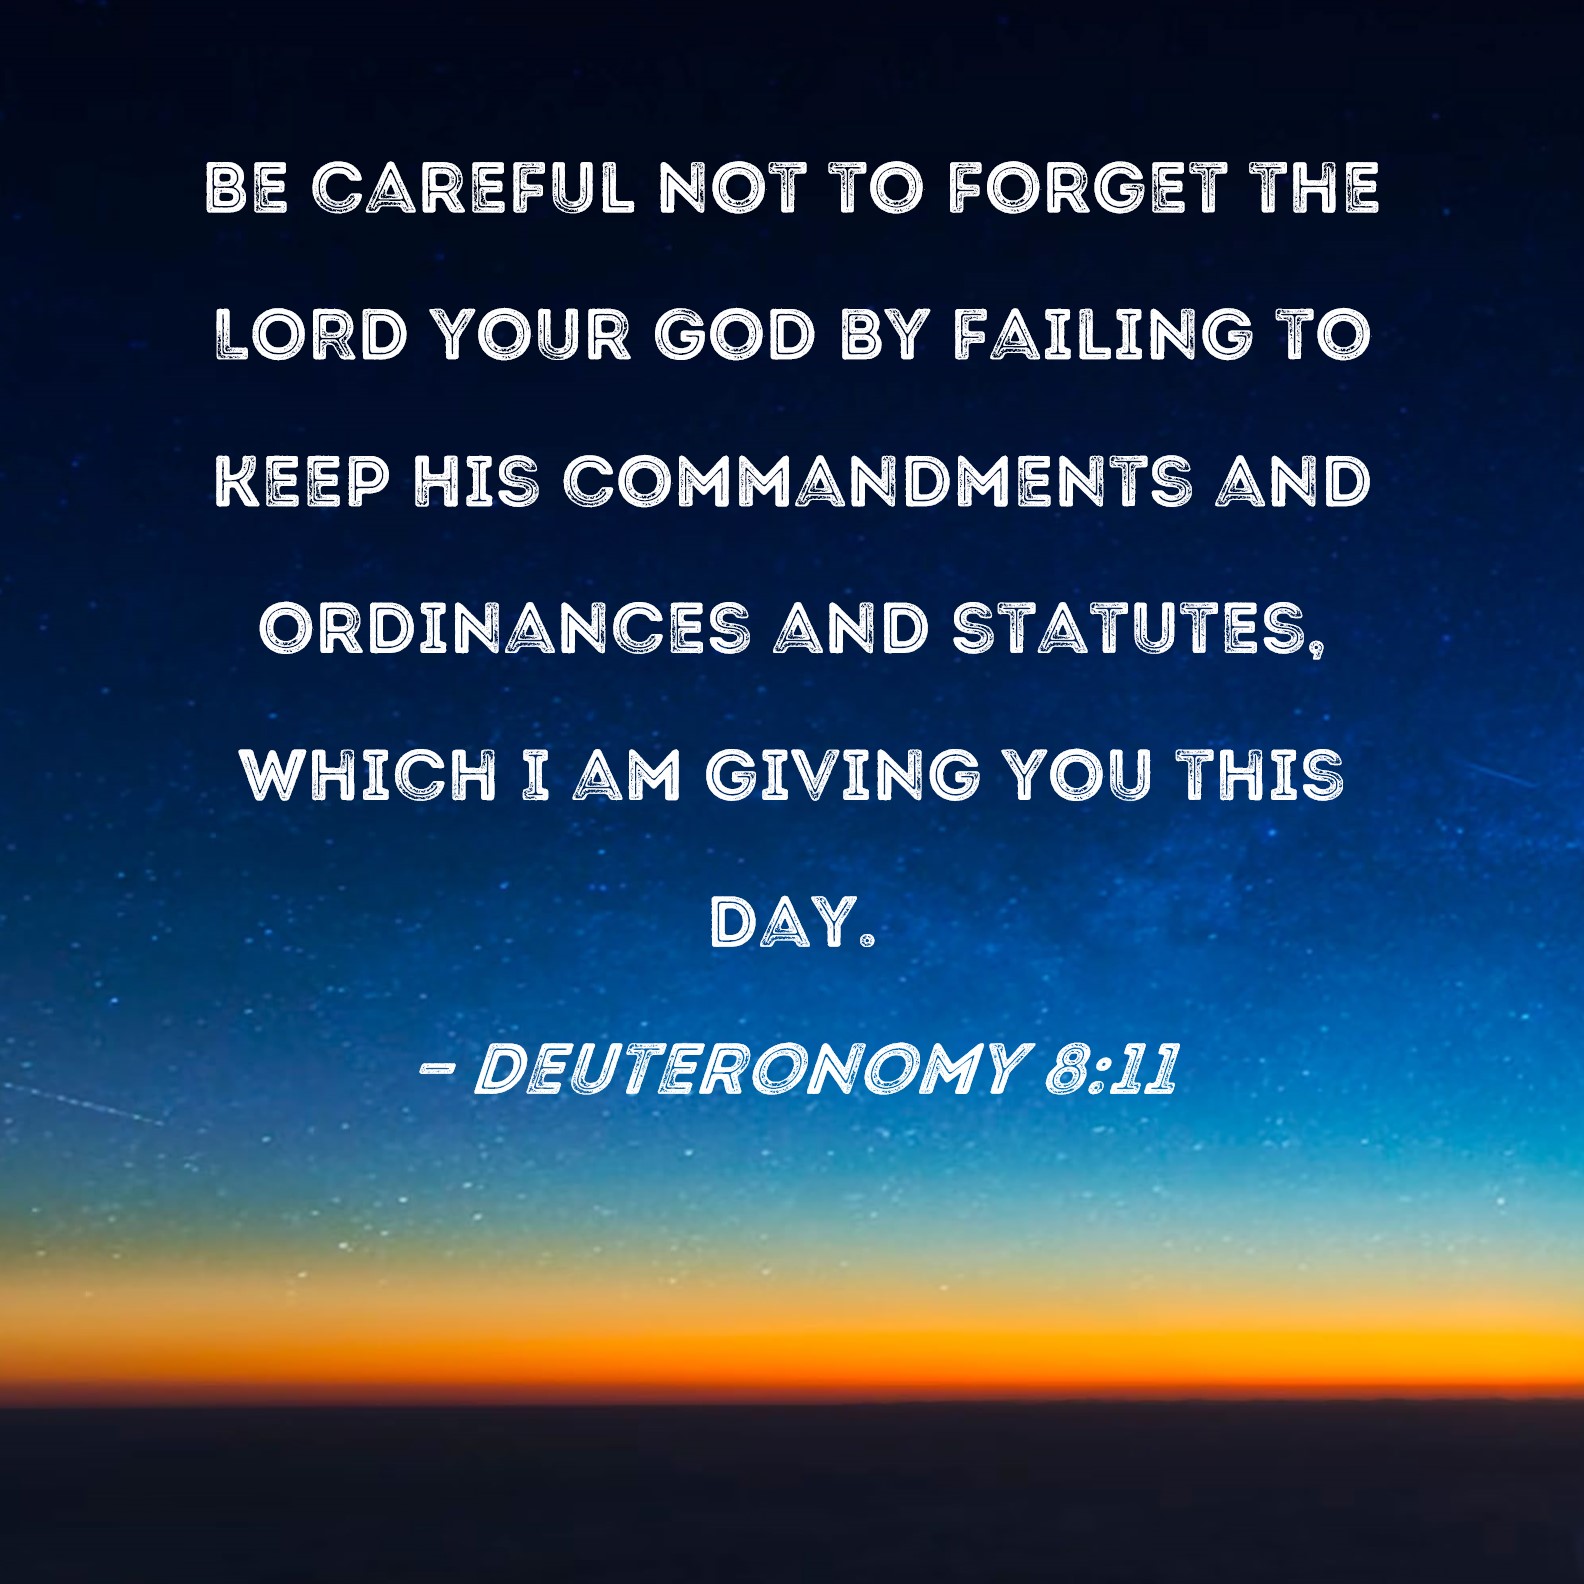 Deuteronomy 8:11 Be careful not to forget the LORD your God by failing to  keep His commandments and ordinances and statutes, which I am giving you  this day.